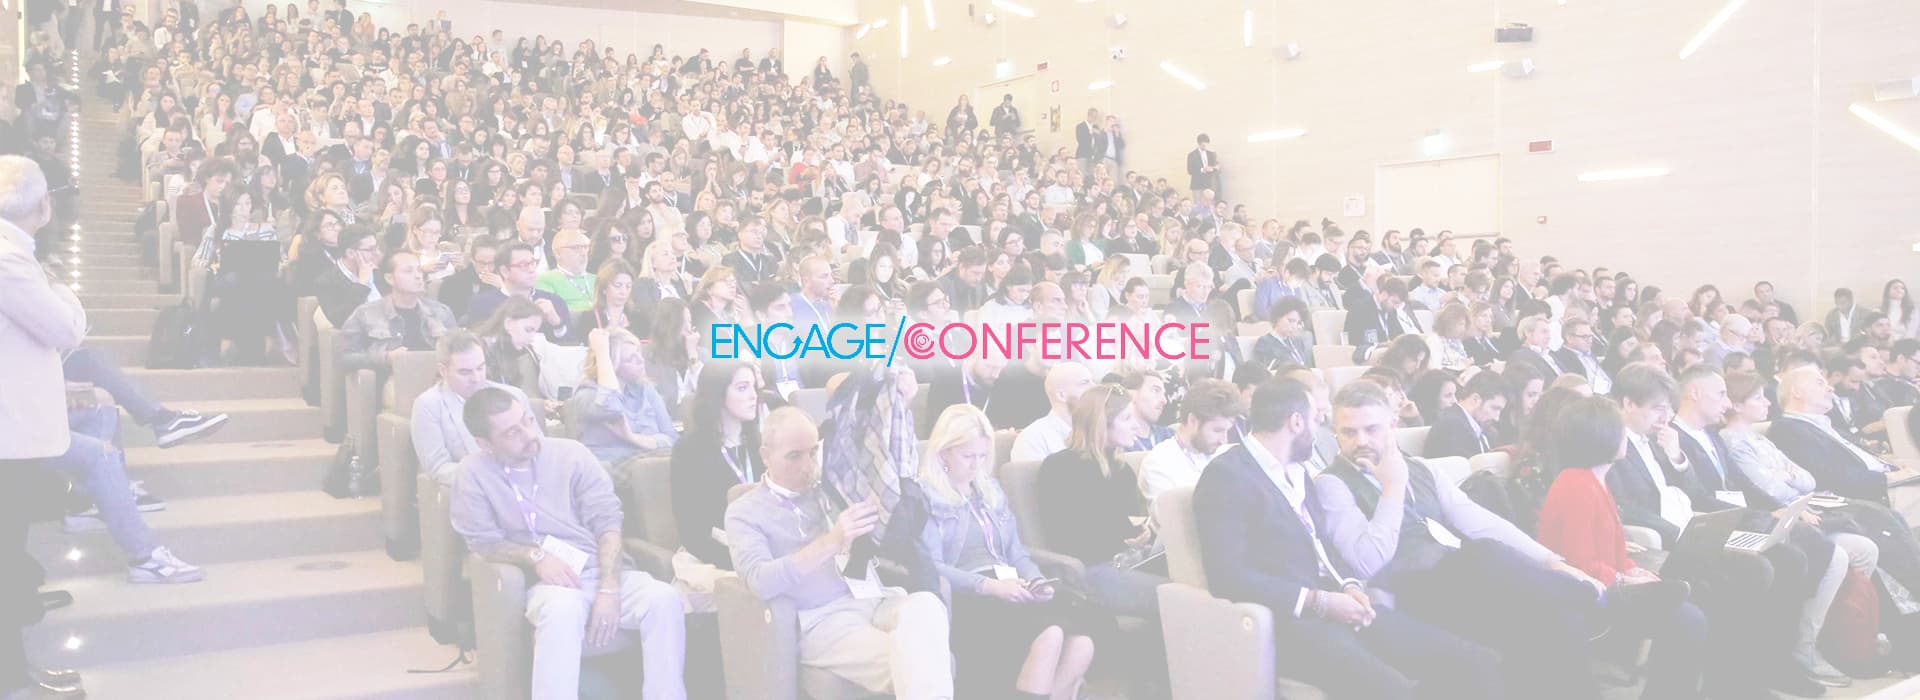 The New Communication a Engage Conference 2019